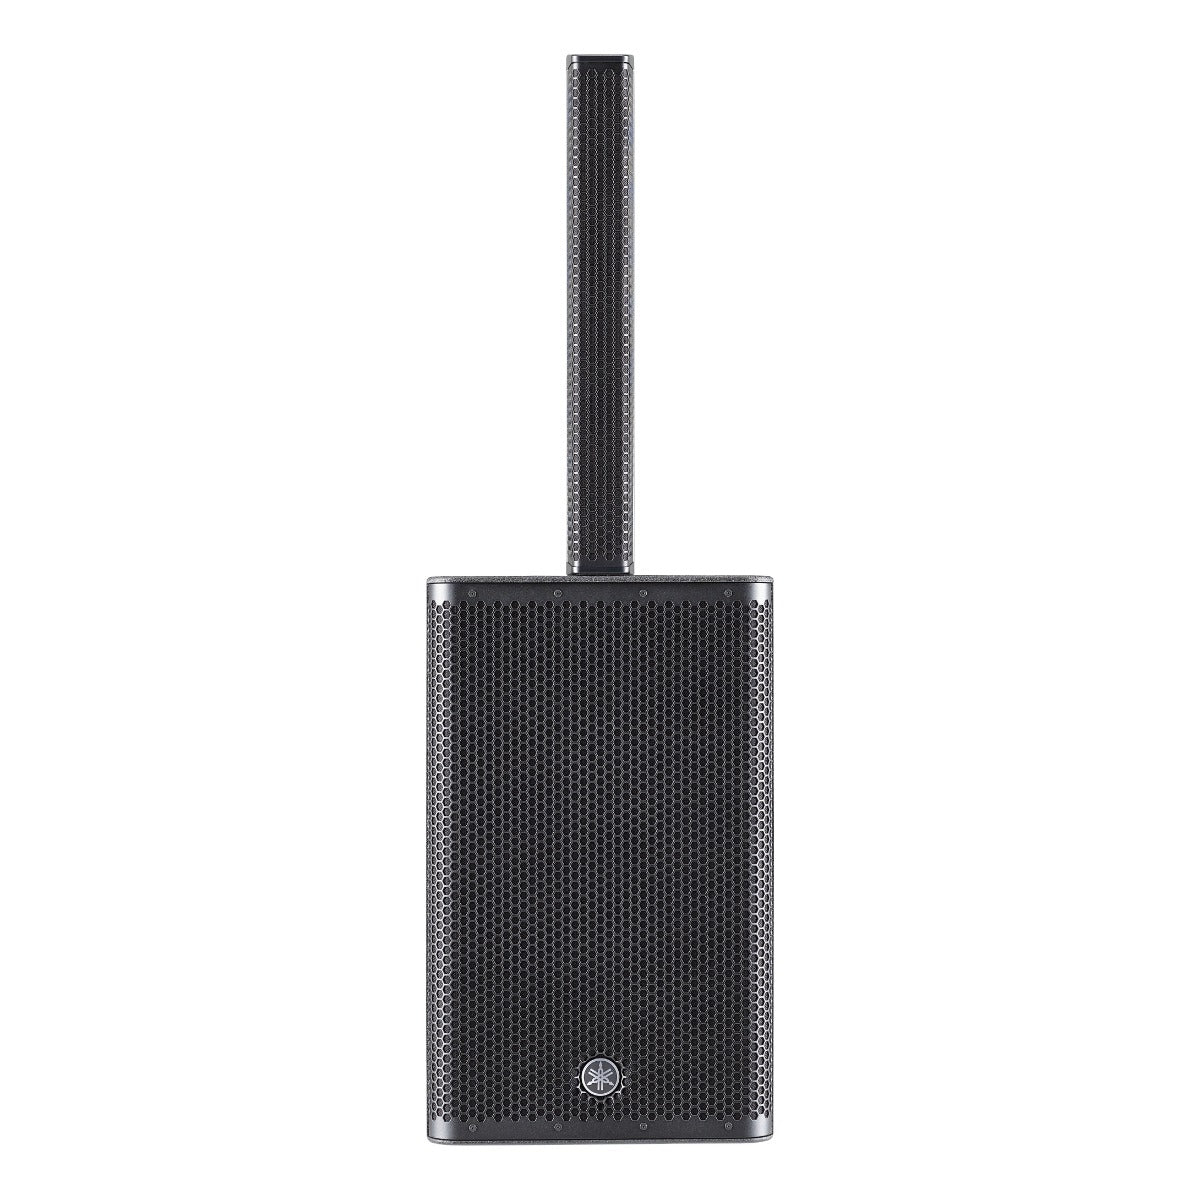 Yamaha STAGEPAS 1K MKII Portable PA System, View 5